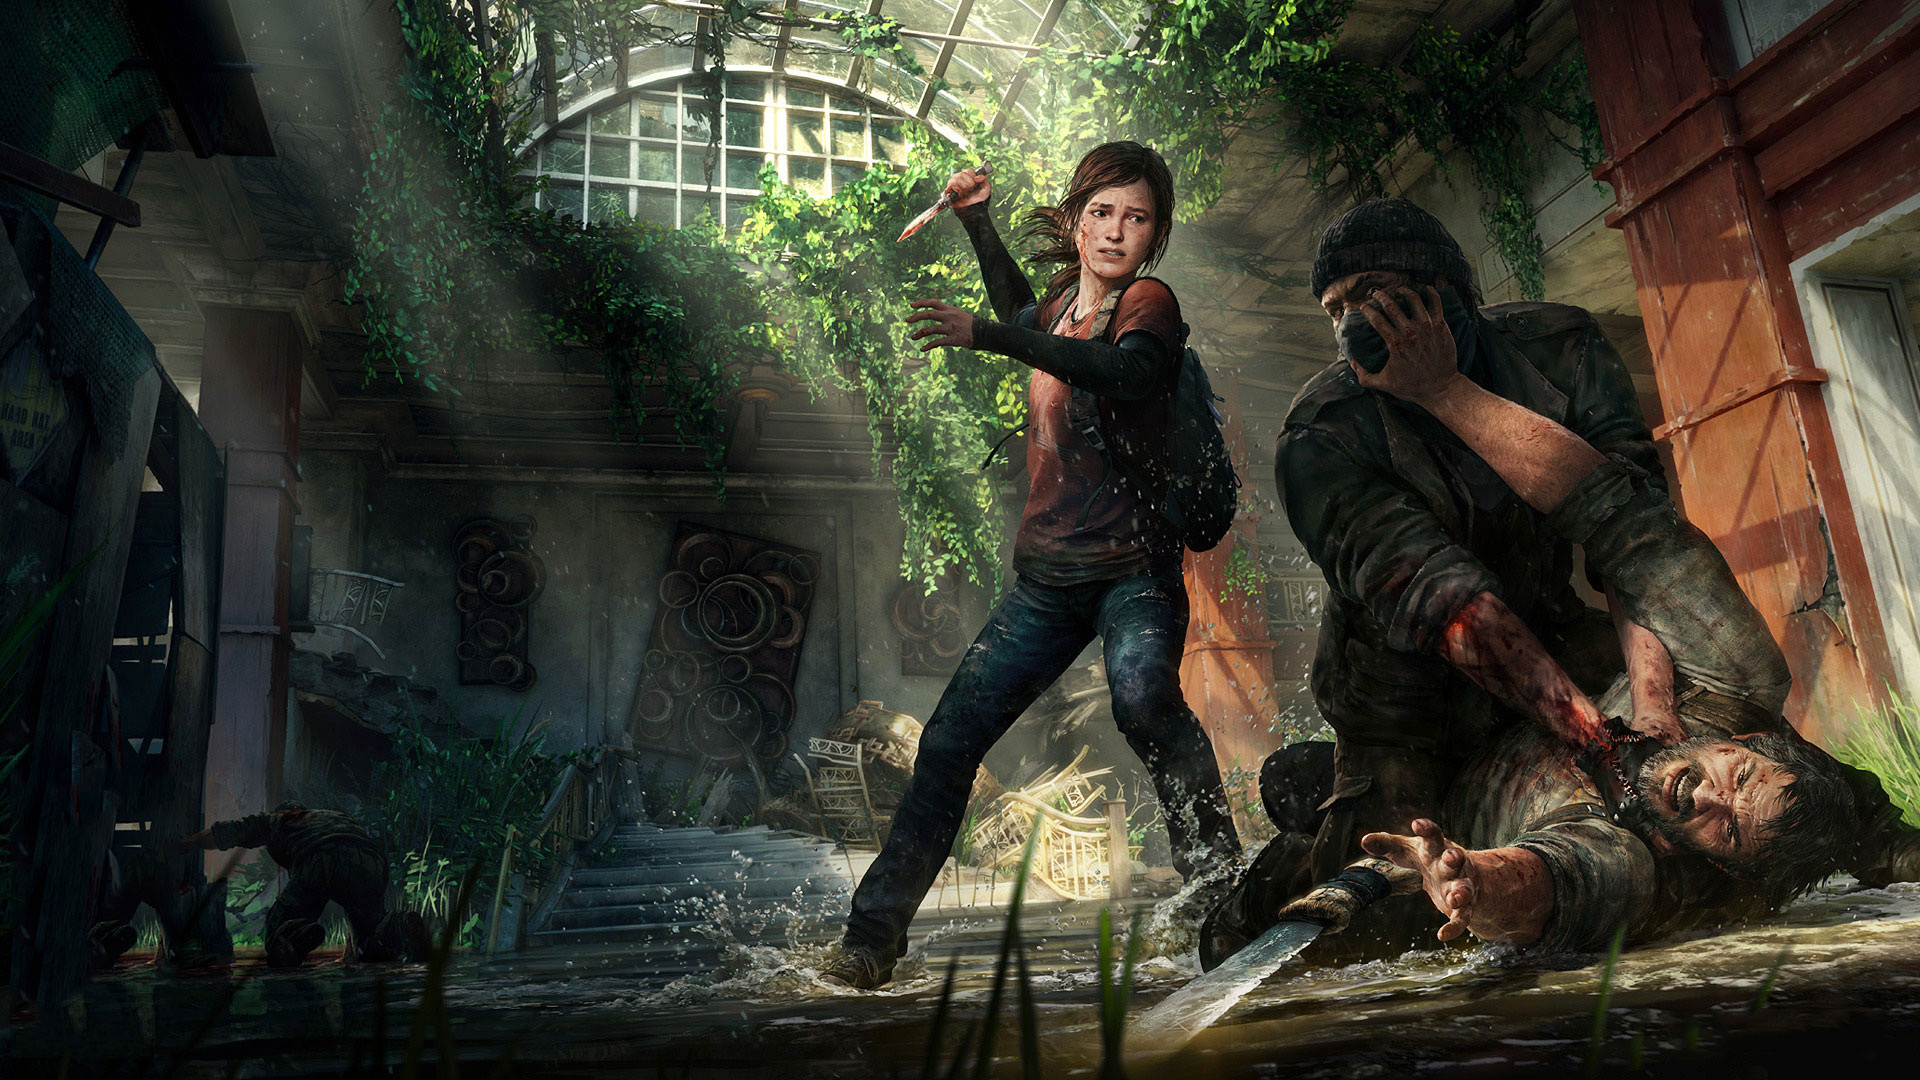 Action Adventure Game, Gaming, Games like The Last of Us, Transfixed, 1920x1080 Full HD Desktop